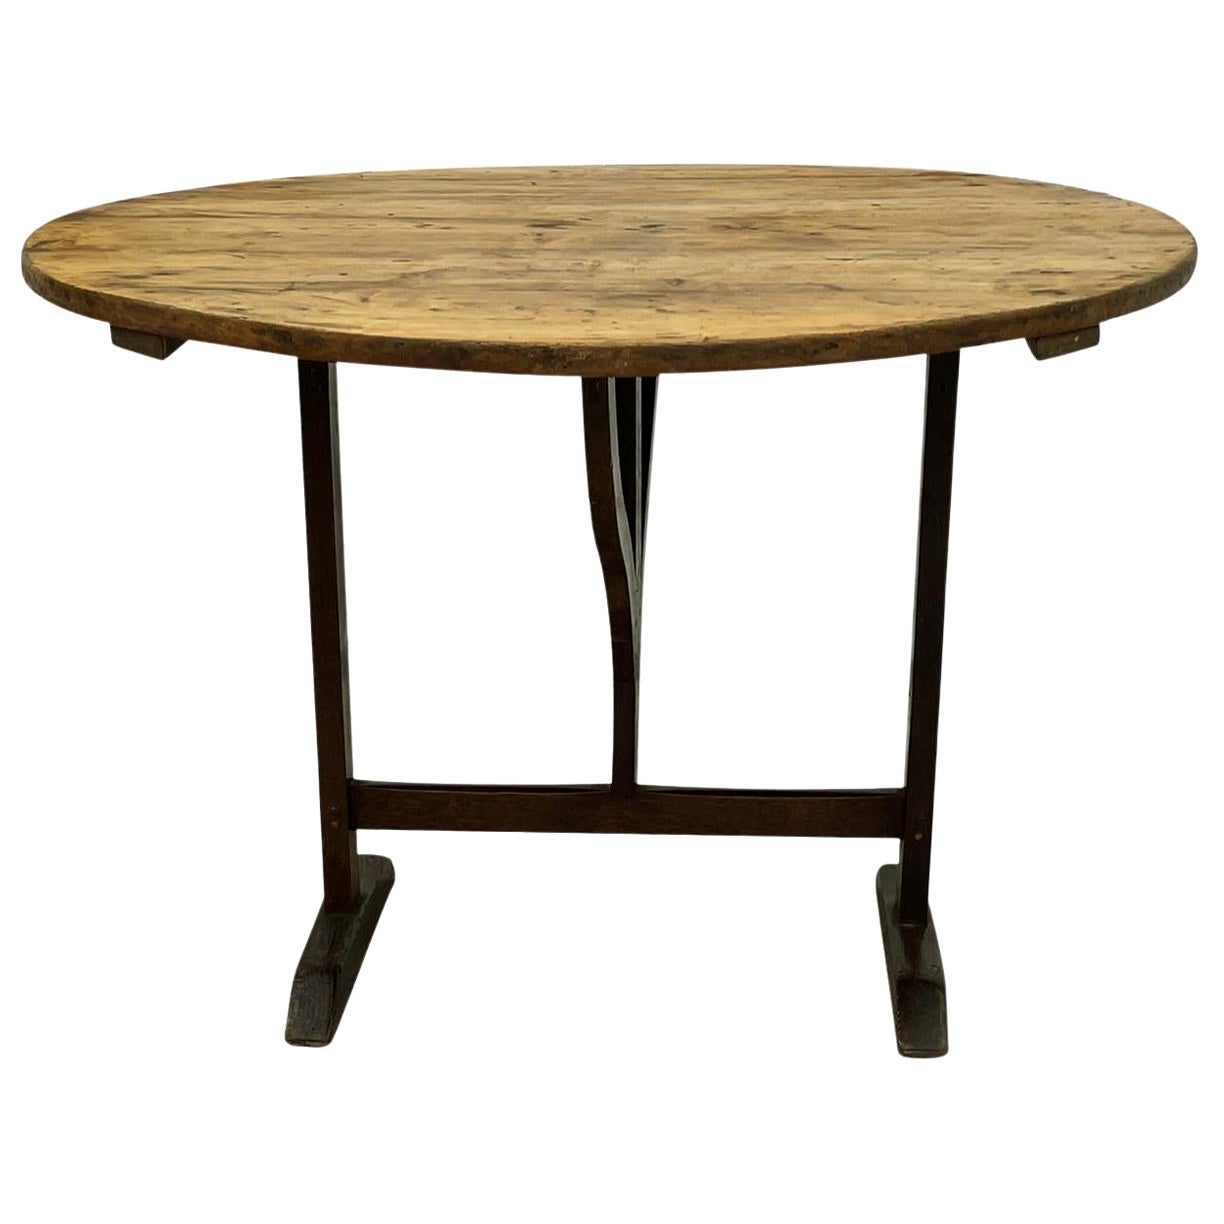 19th Century French Provincial Walnut Folding Wine Table - Antique Side Table For Sale